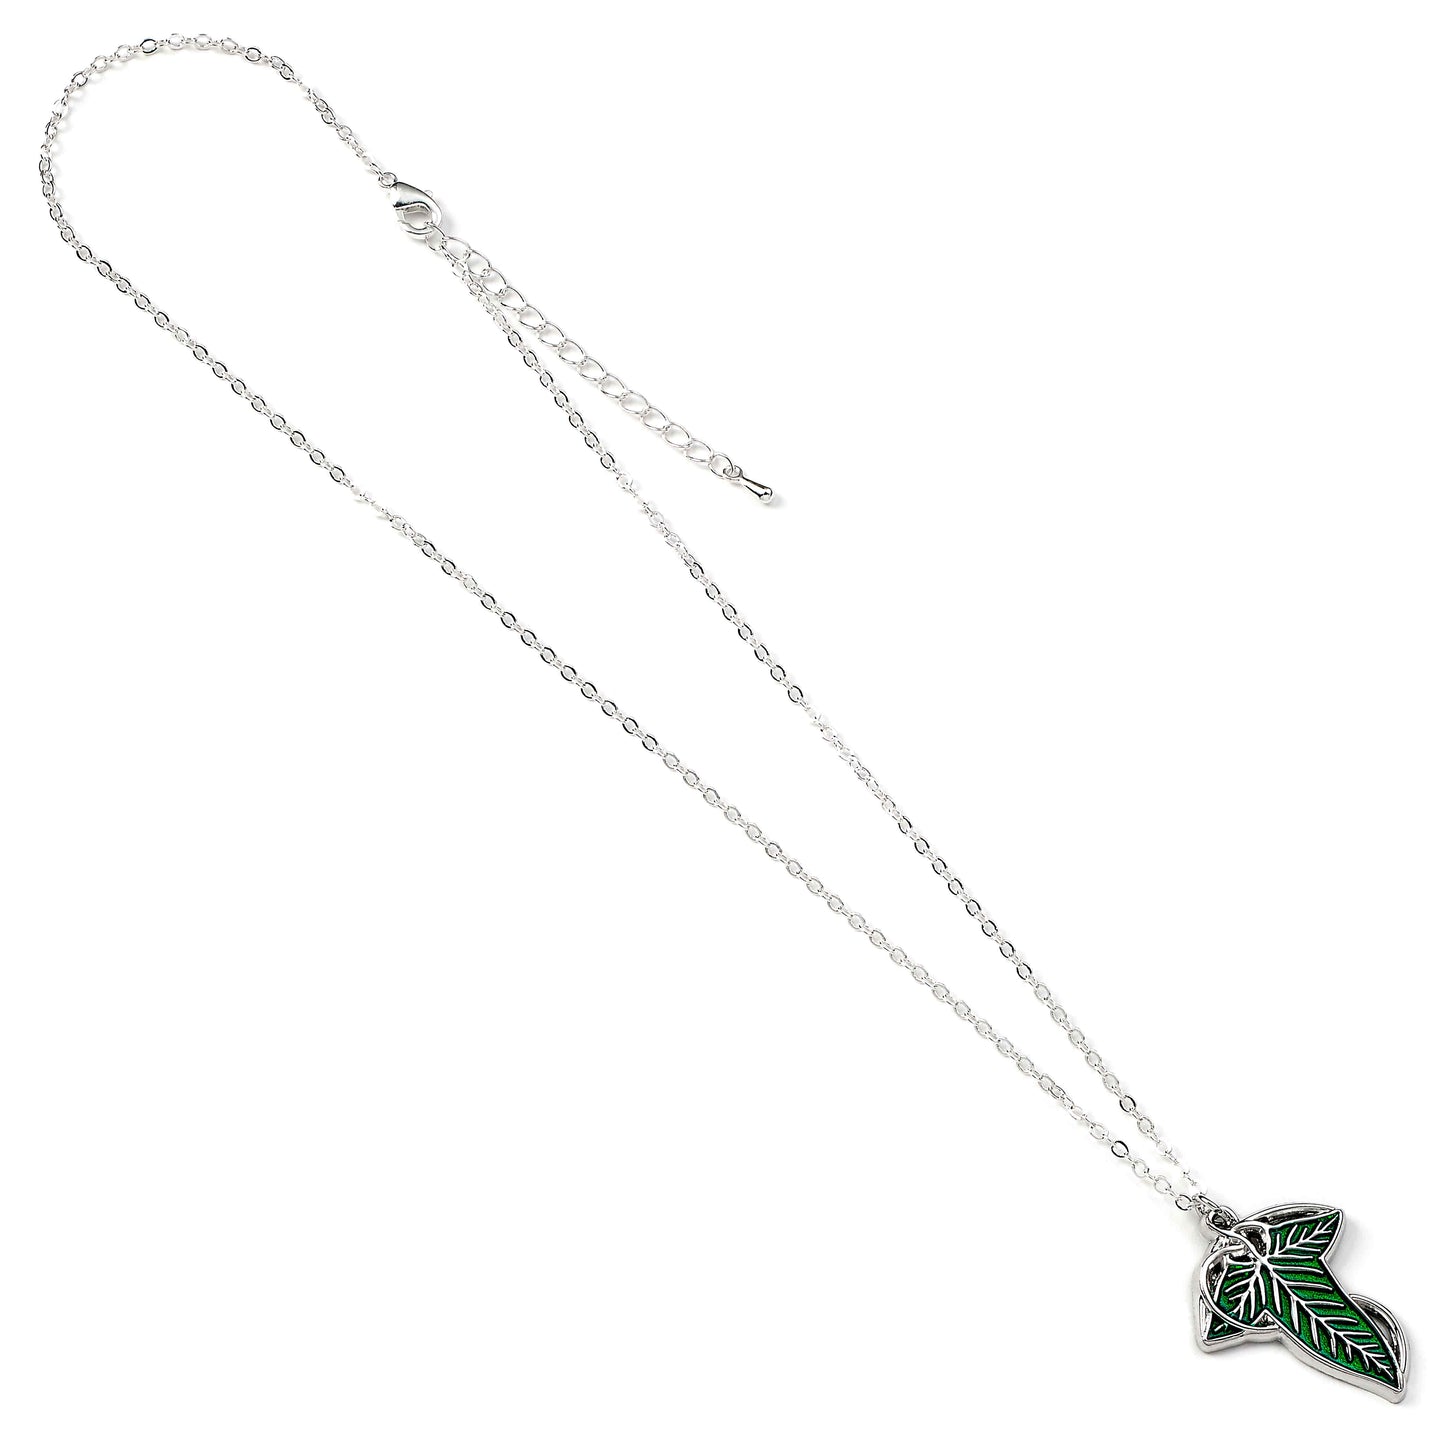 The Lord of The Rings The Leaf of Lorien Necklace